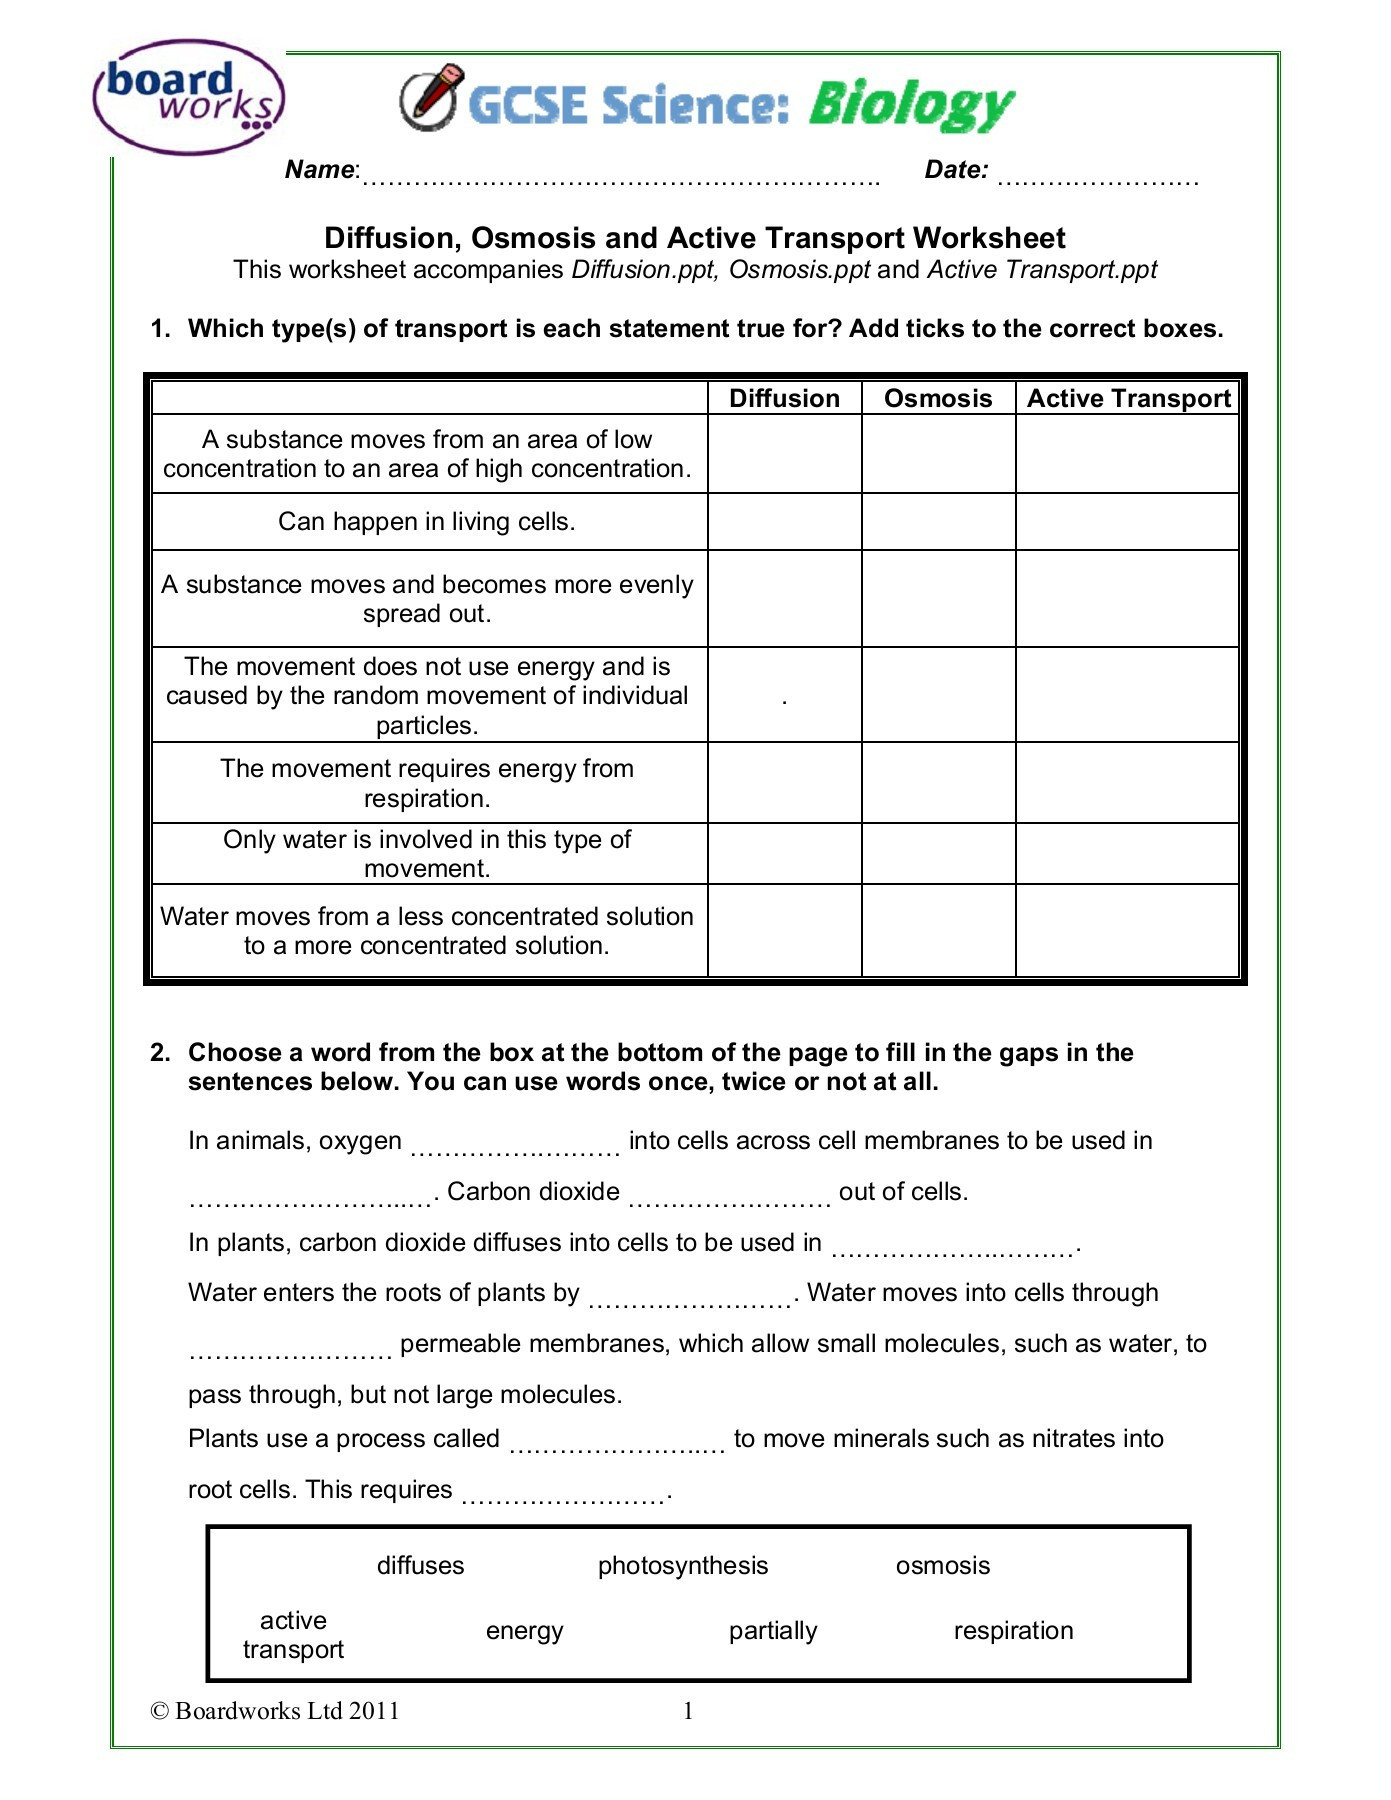 Diffusion and Osmosis Worksheet Answers Diffusion Osmosis and Active Transport Worksheet Pages 1 4